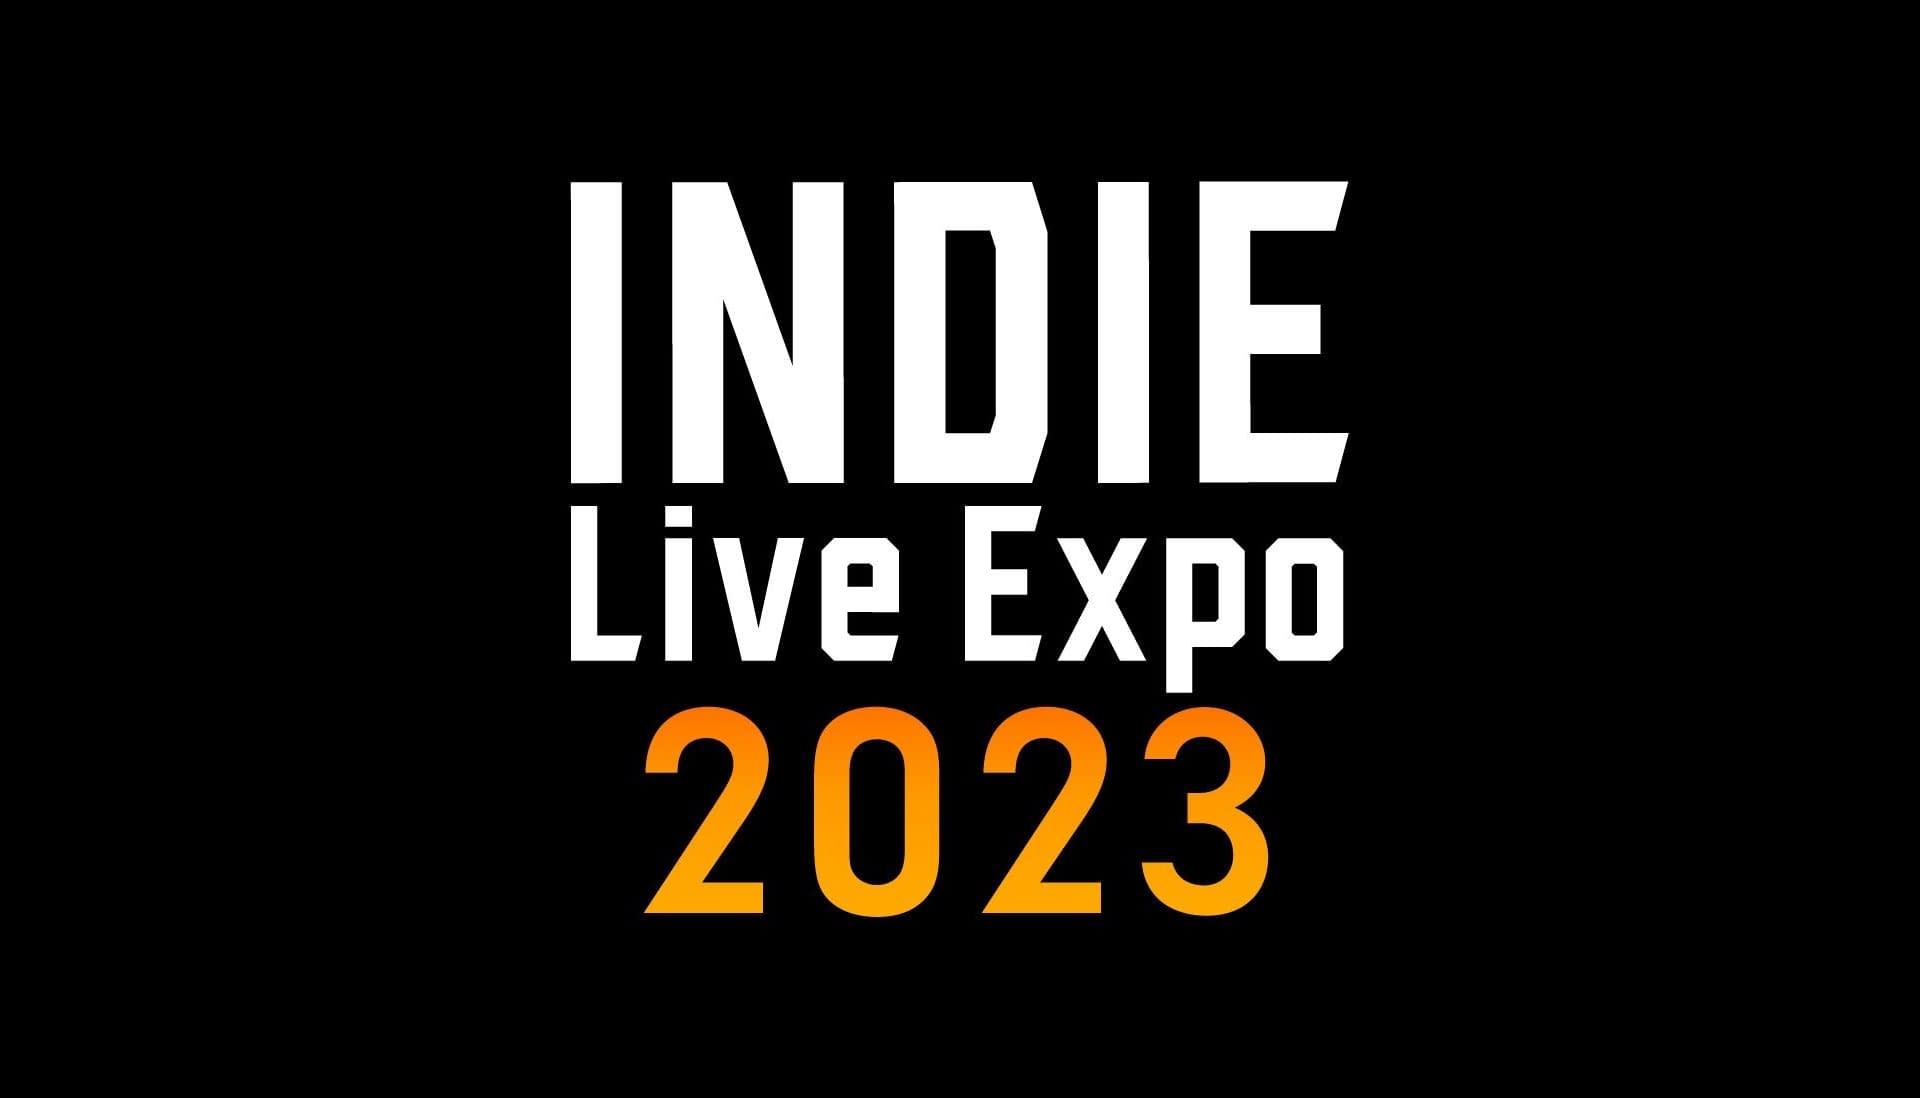 INDIE Live Expo will exhibit more than 200 games in 2023 event